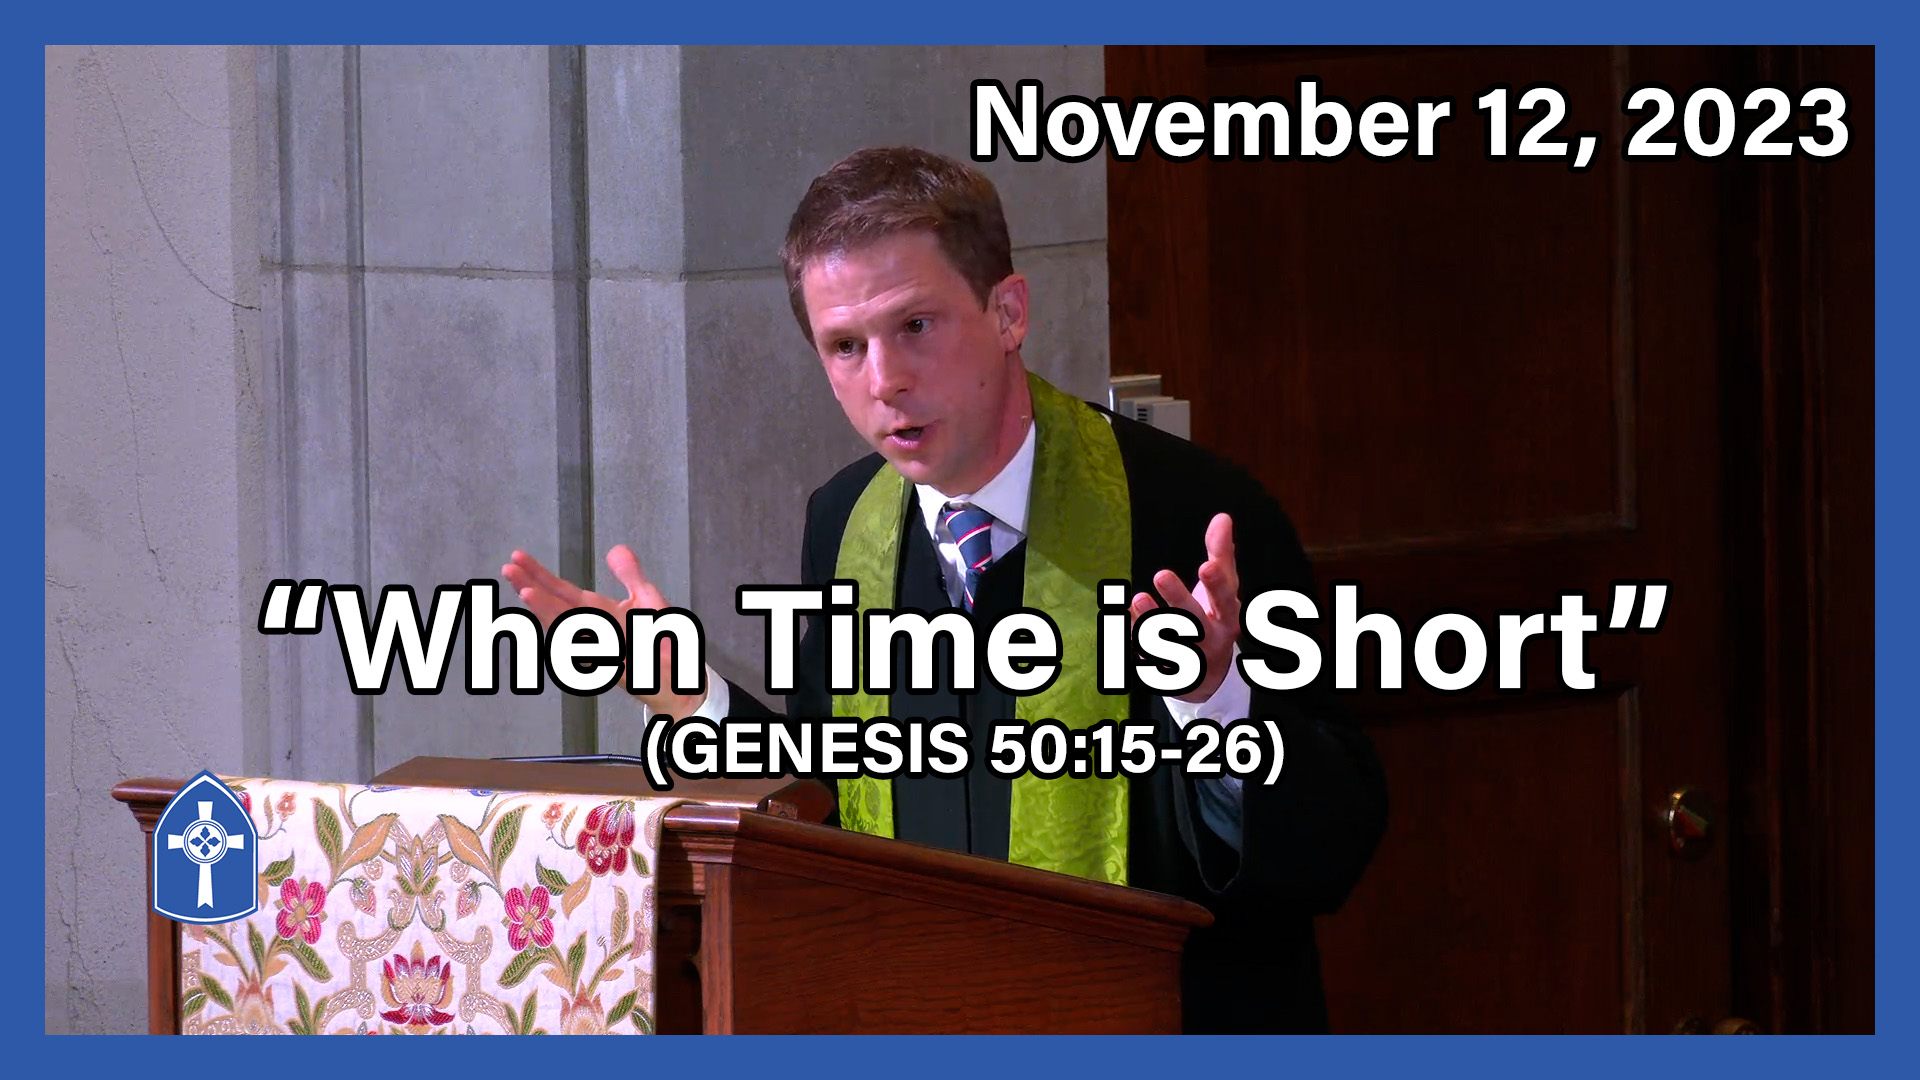 November 12 - When Time is Short